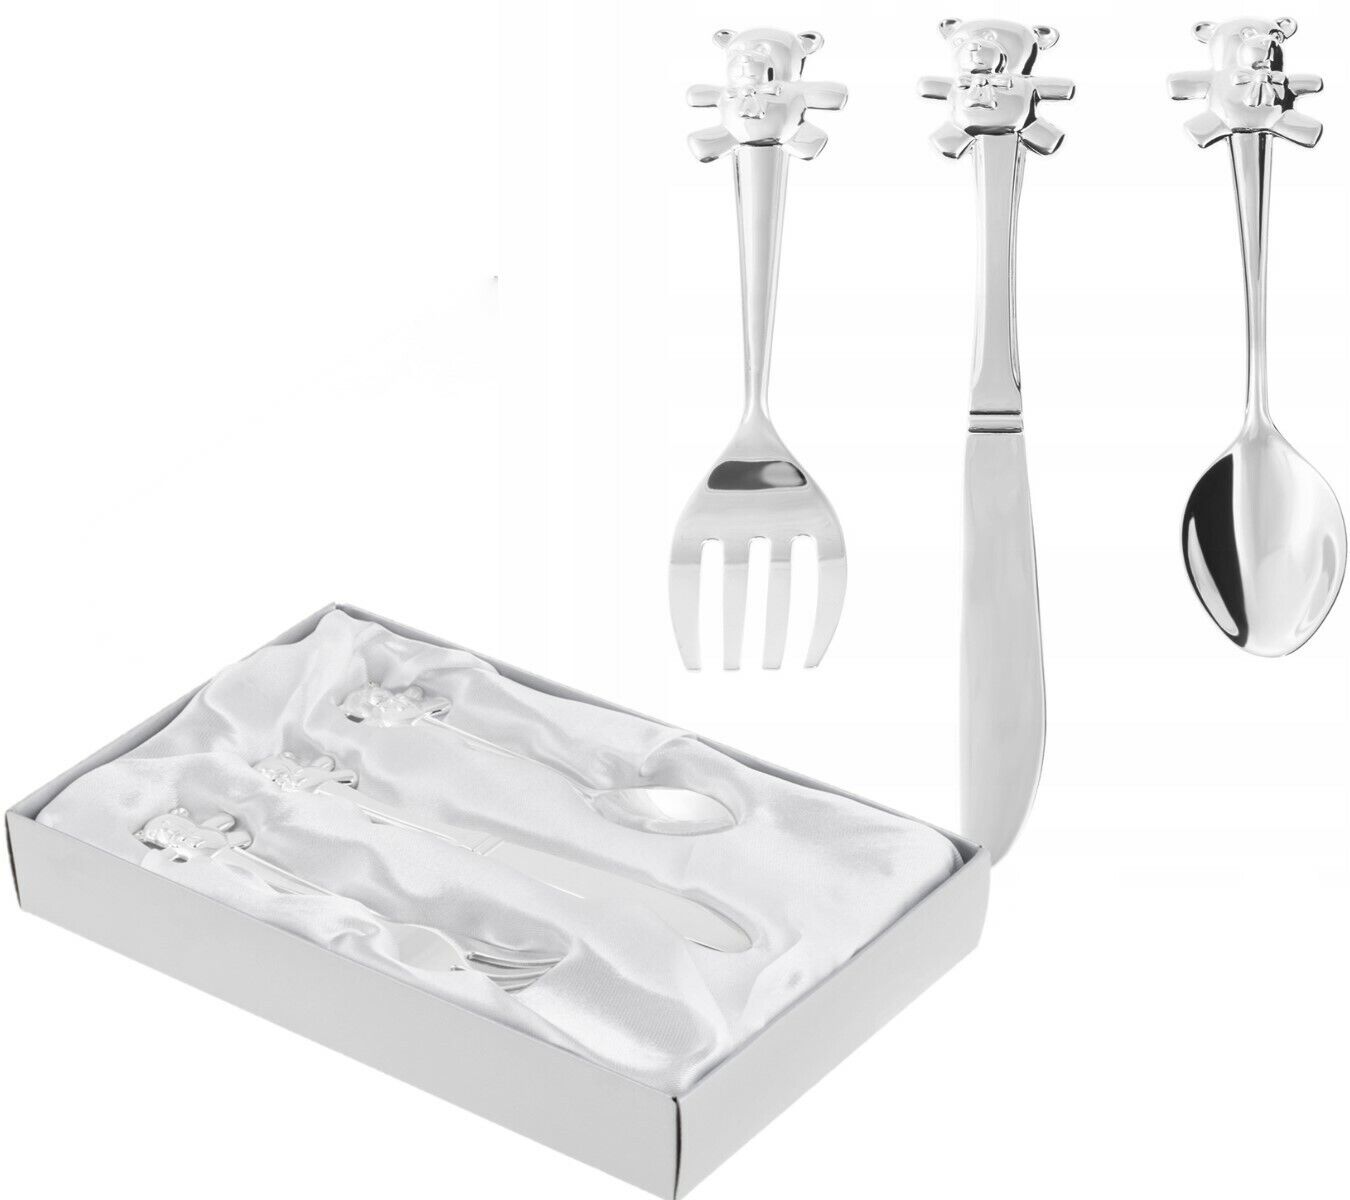 Silver Plated Teddy Bear Cutlery Set Christening New Baby Christmas Gift